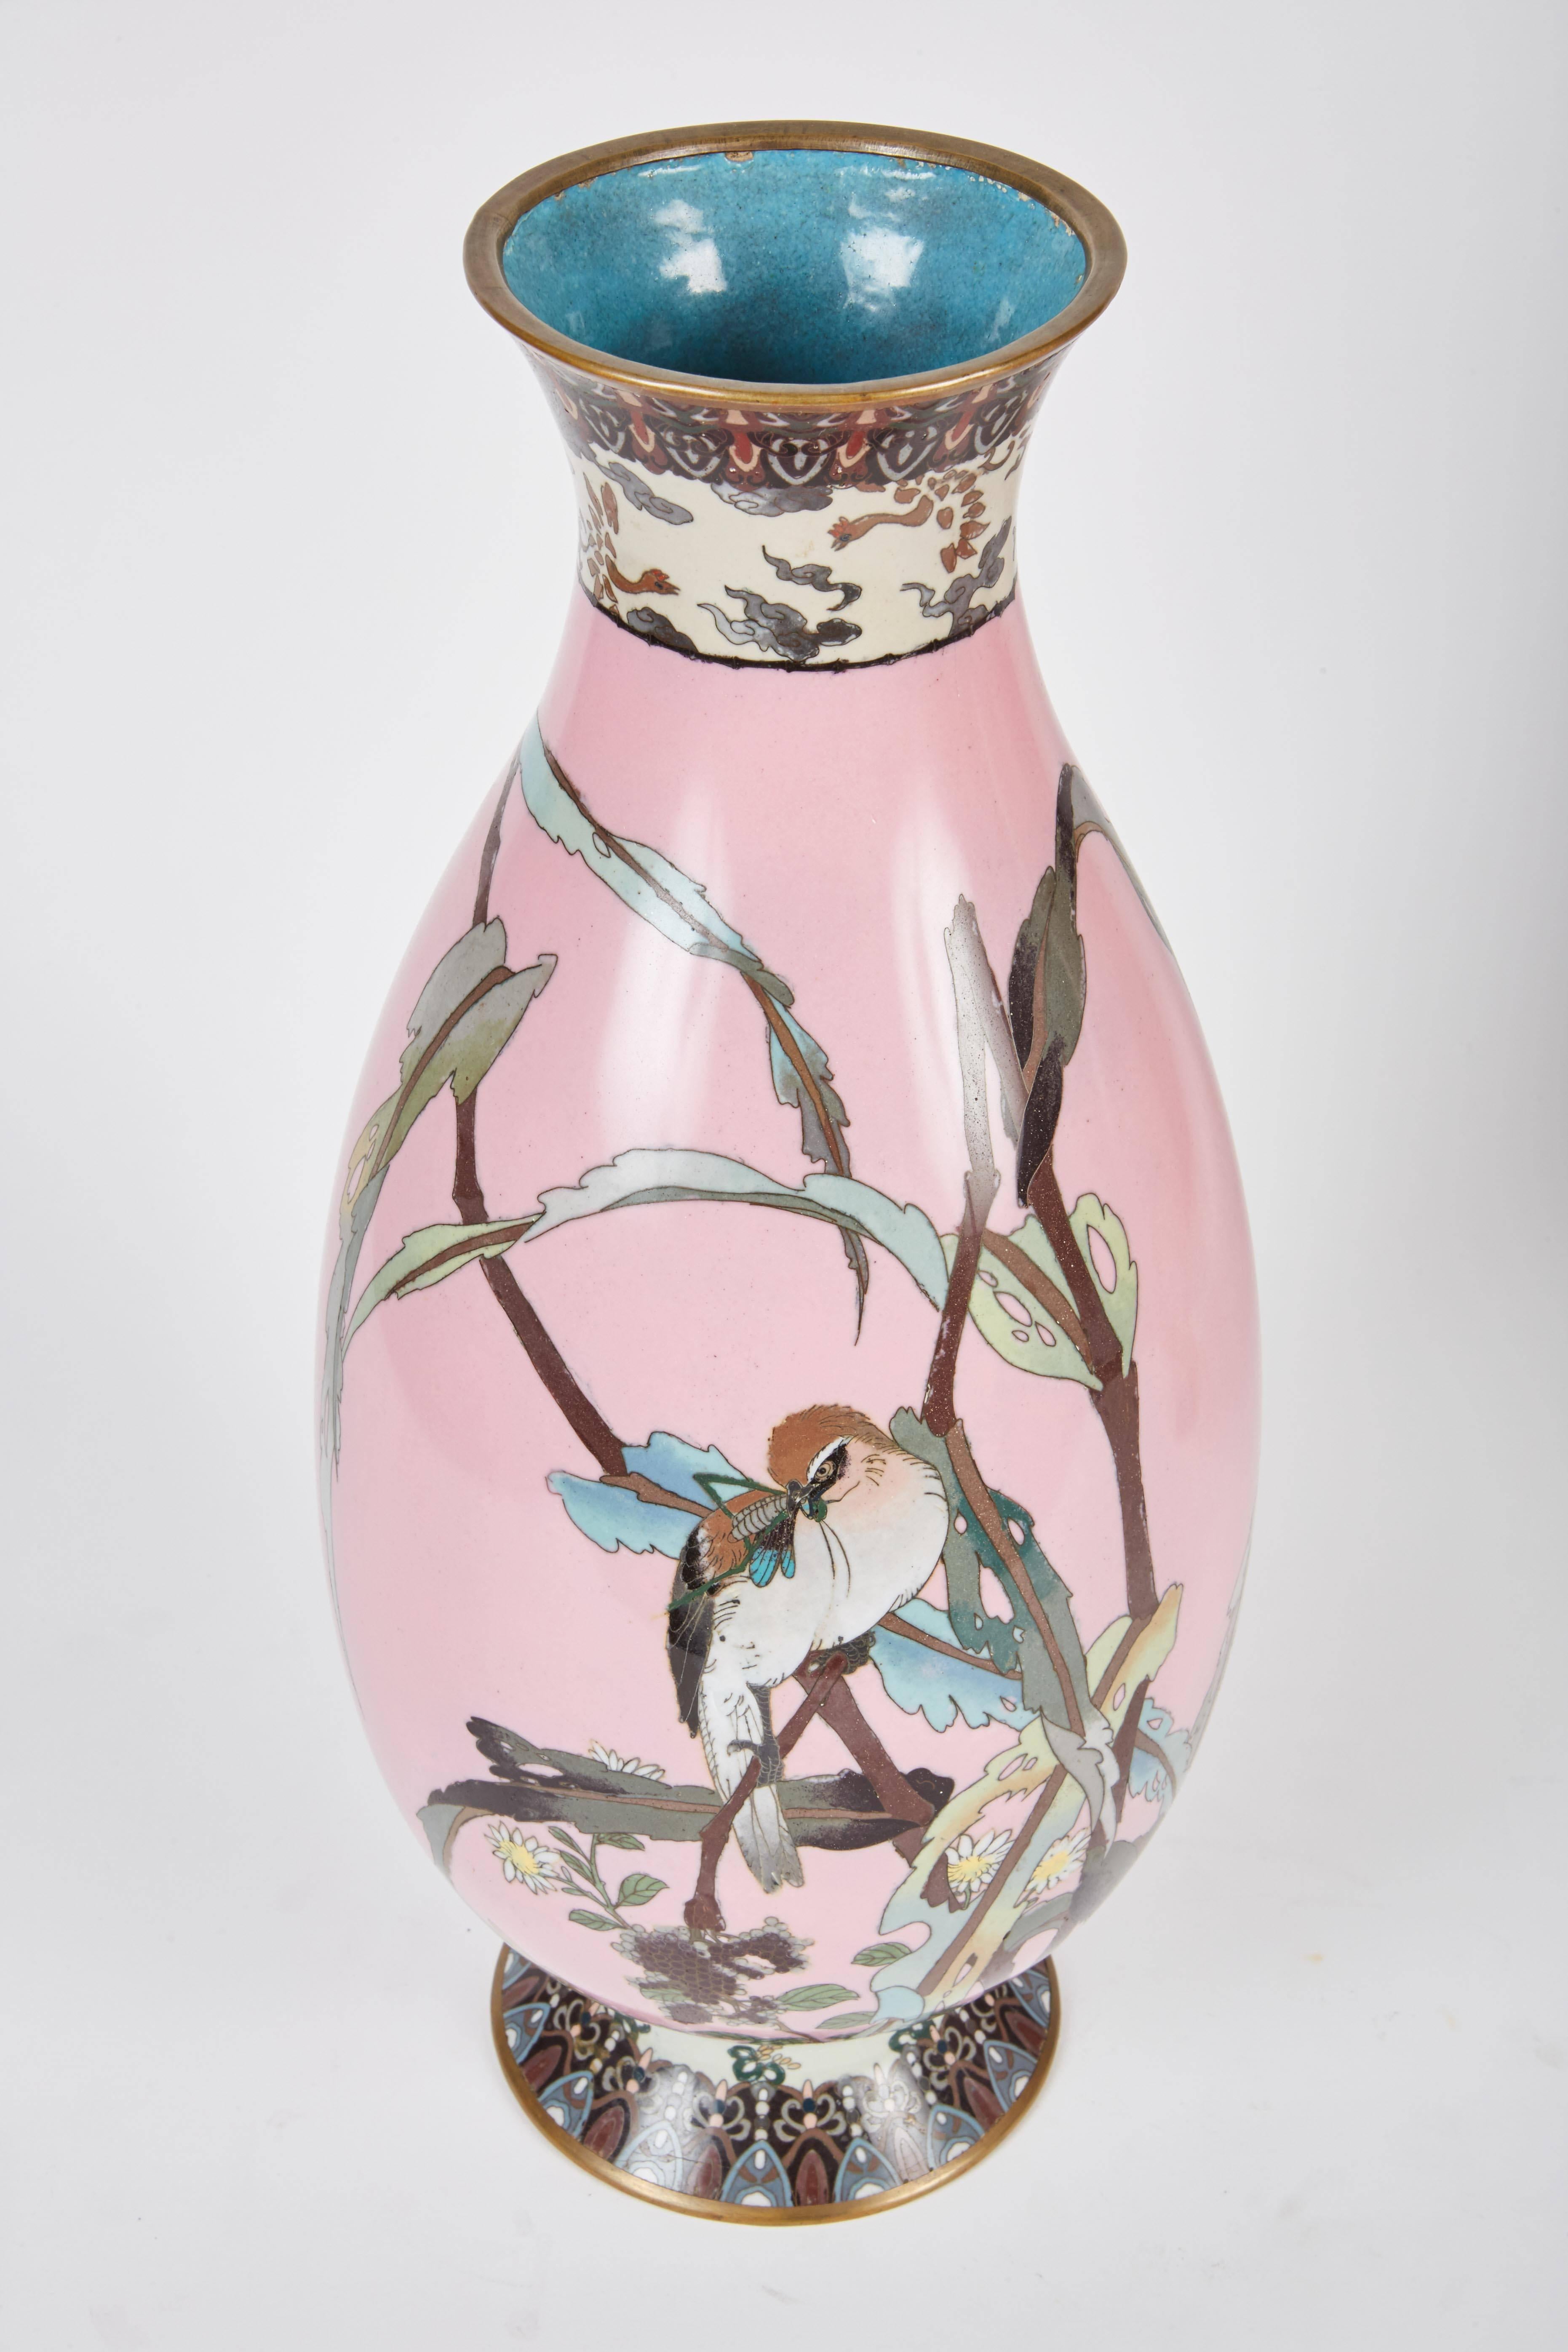 A pair of magnificently detailed pastel pink Cloisonné vases from late 19th century Japan, with depictions of birds resting on tree branches in a pink field.